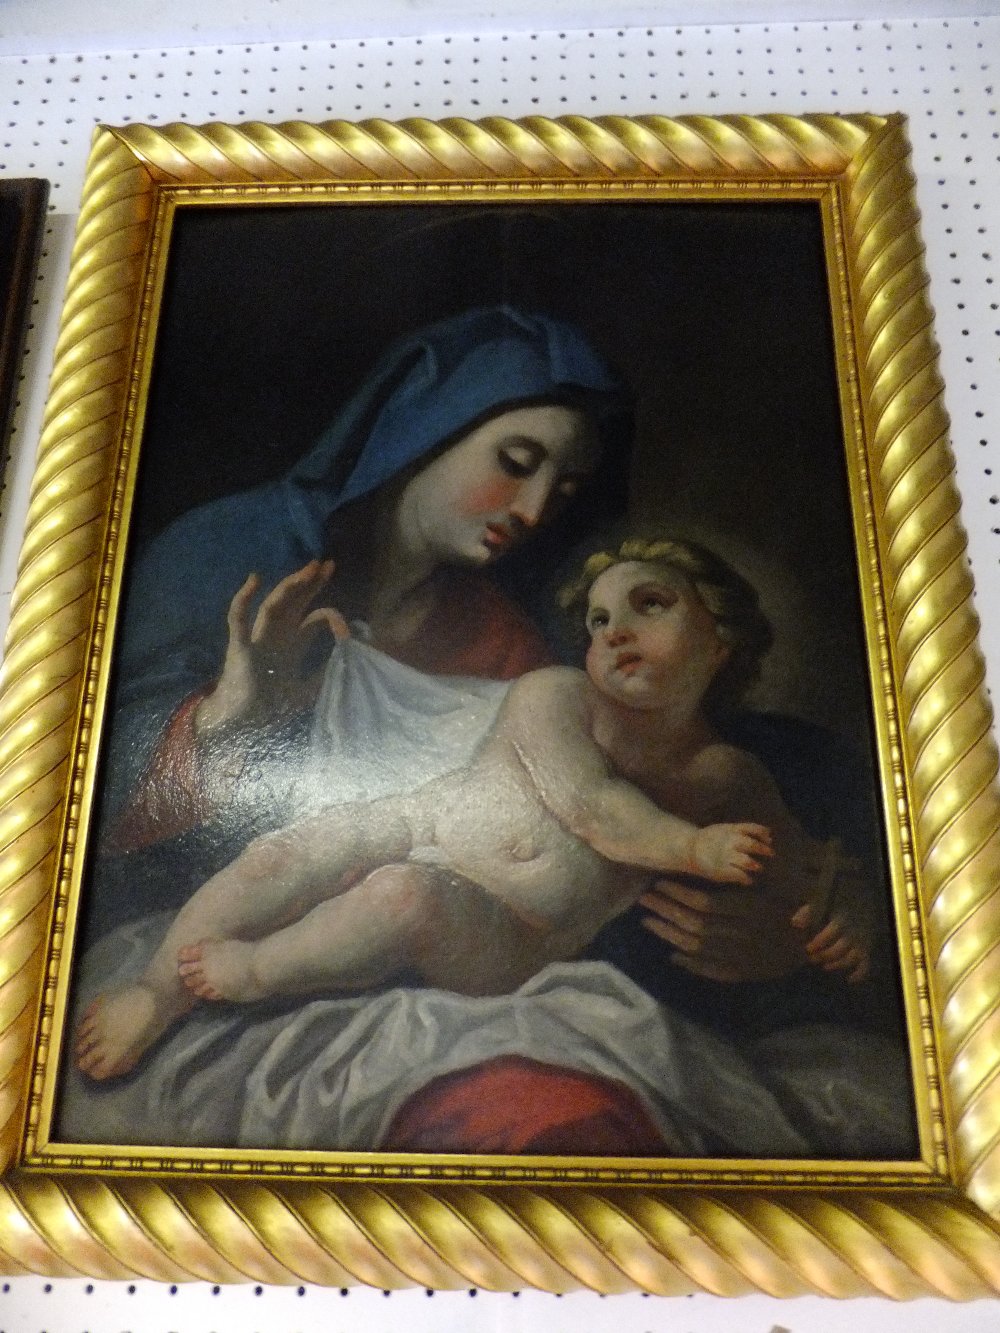 UNKNOWN ARTIST 18thC oil on wooden panel portrait of Madonna and child, unsigned, undated, framed